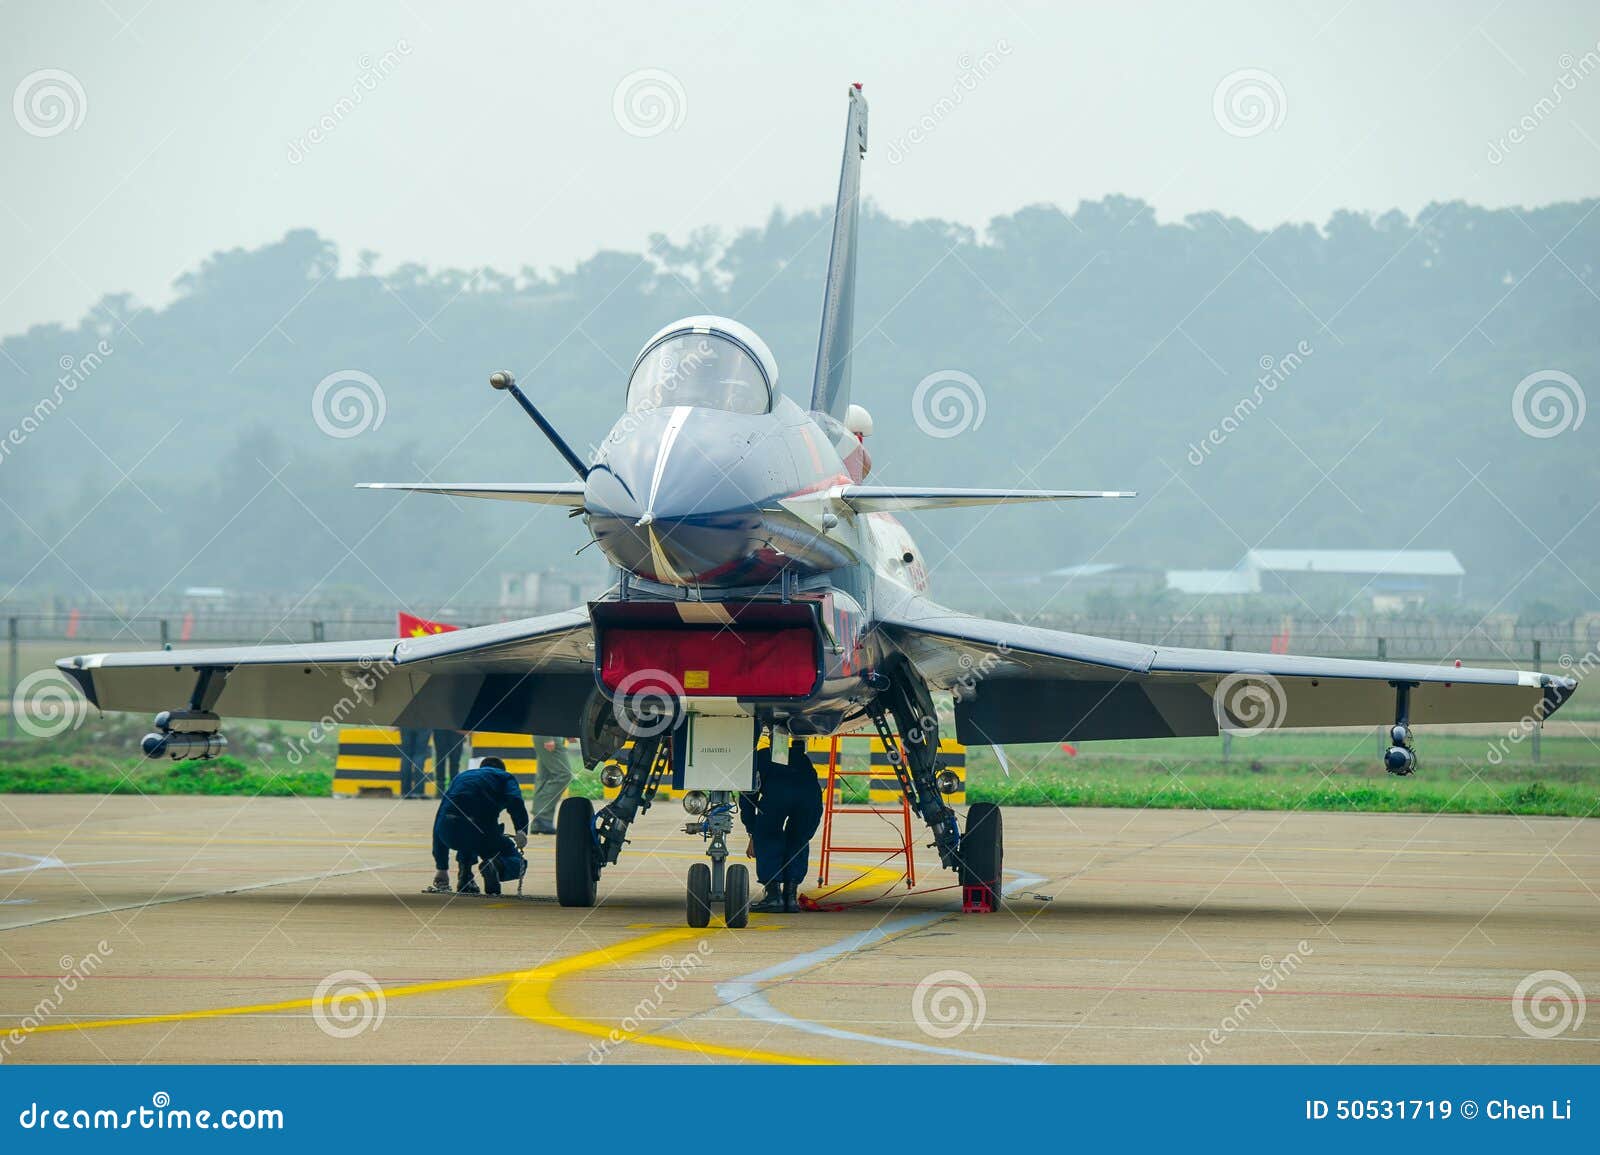 Fighter planes on the tarmac. On the tarmac fighter neatly arranged, doing the preparation before taking off.